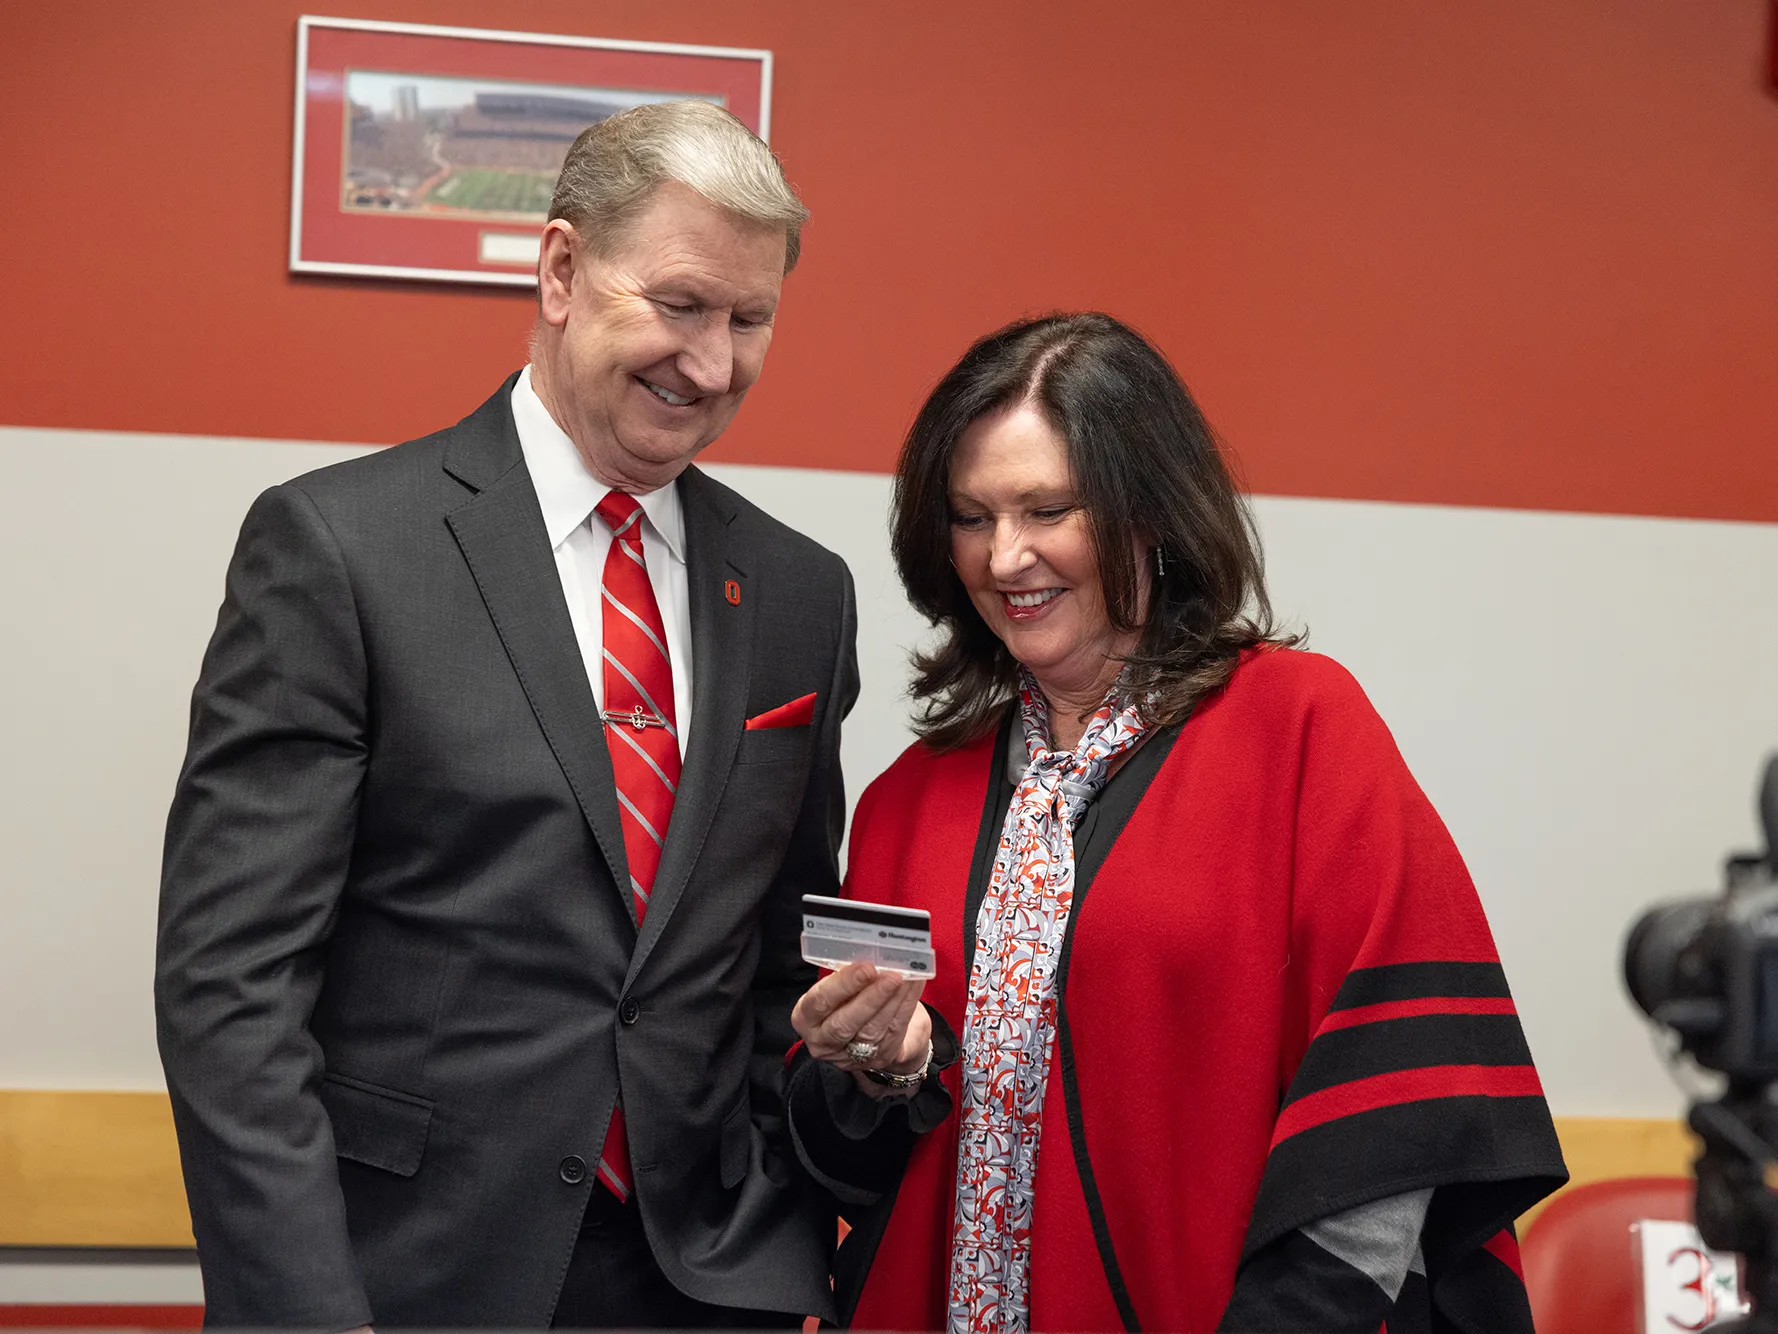 Ohio State President Ted Carter and his wife Lynda Carter smile as they look at her first BuckID in the office where Buckeyes have their ID photos taken. They’re both dressed up in Ohio State colors.